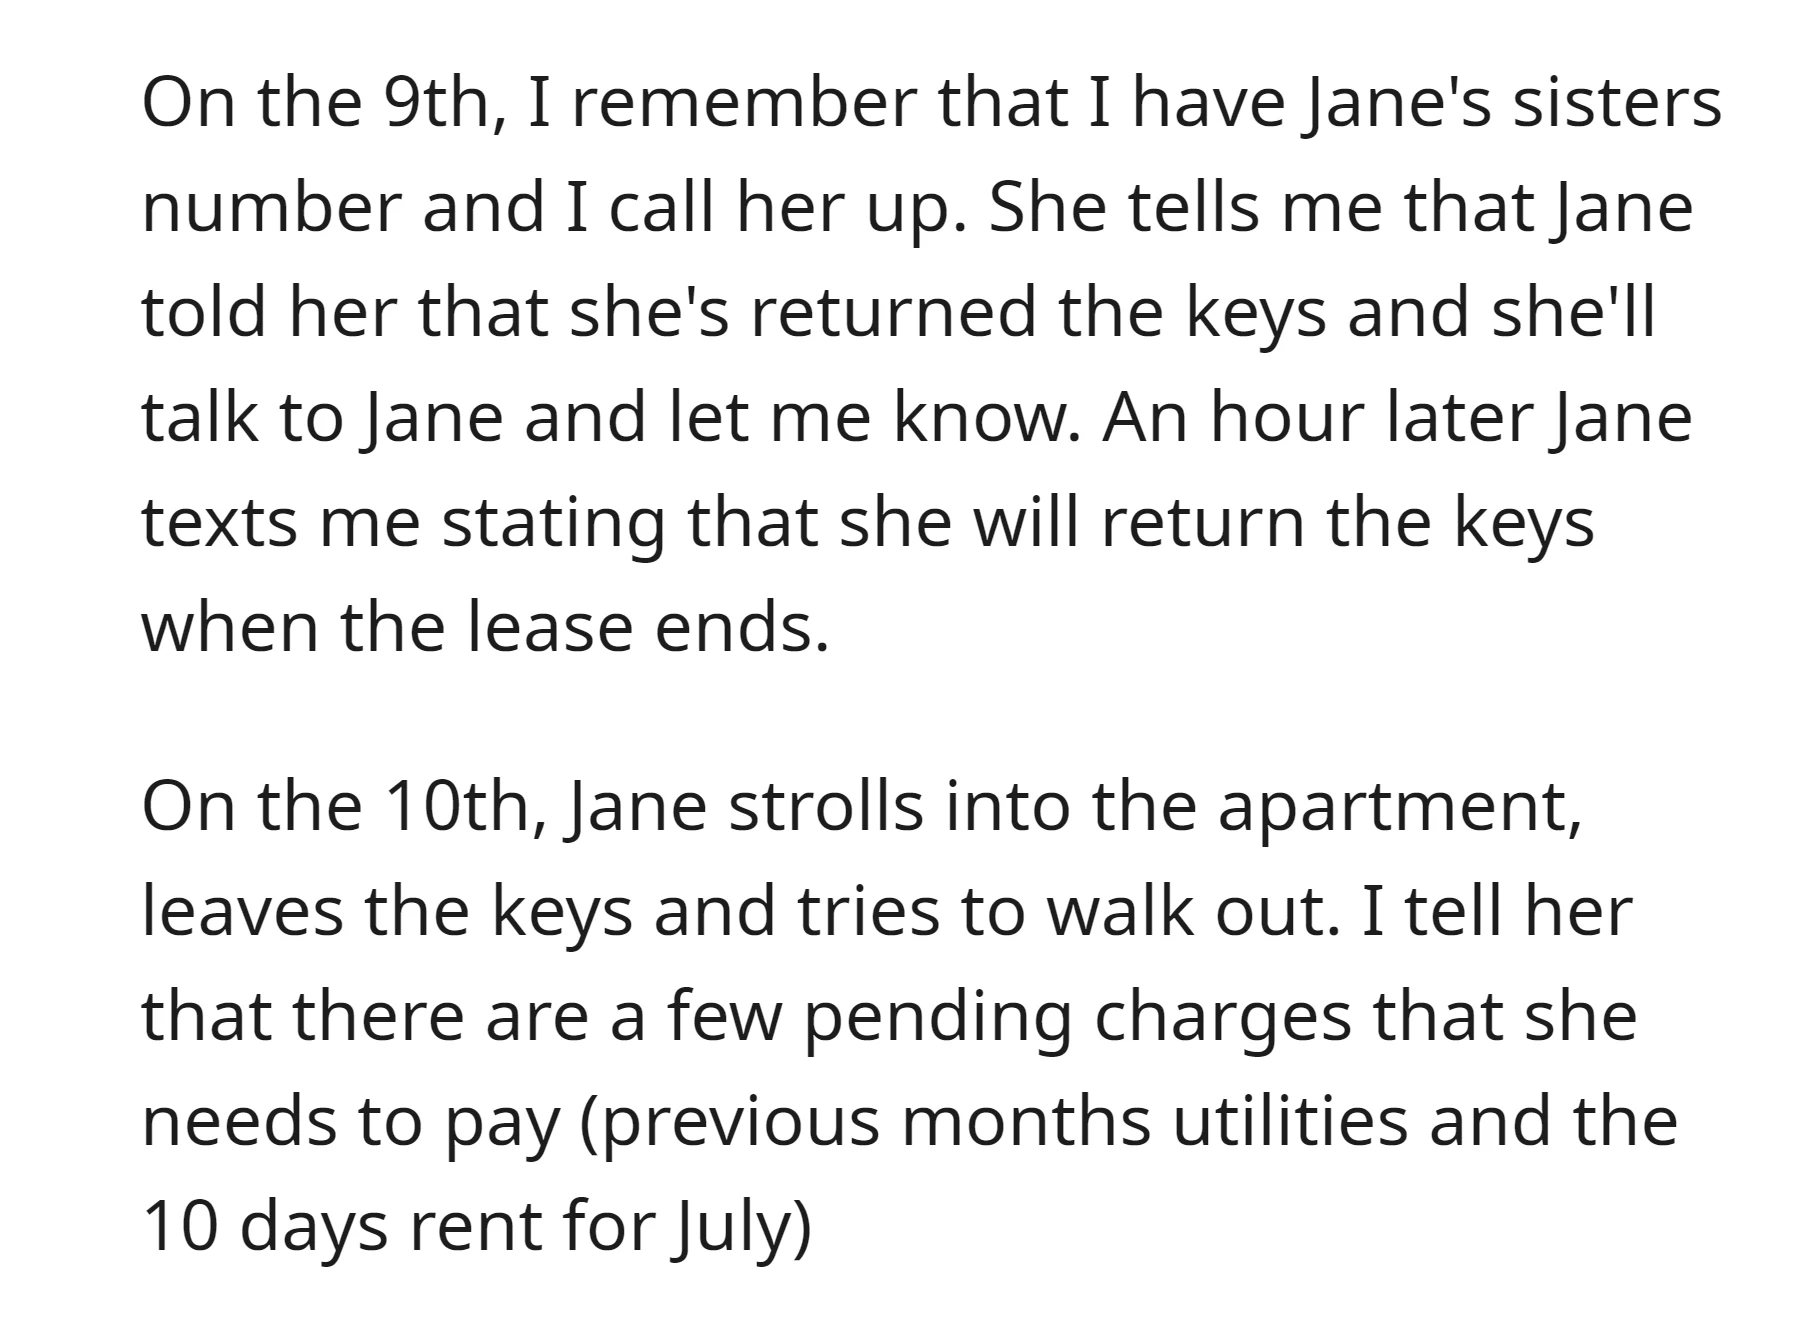 when Jane drops off the keys, the OP notifies her of pending charges